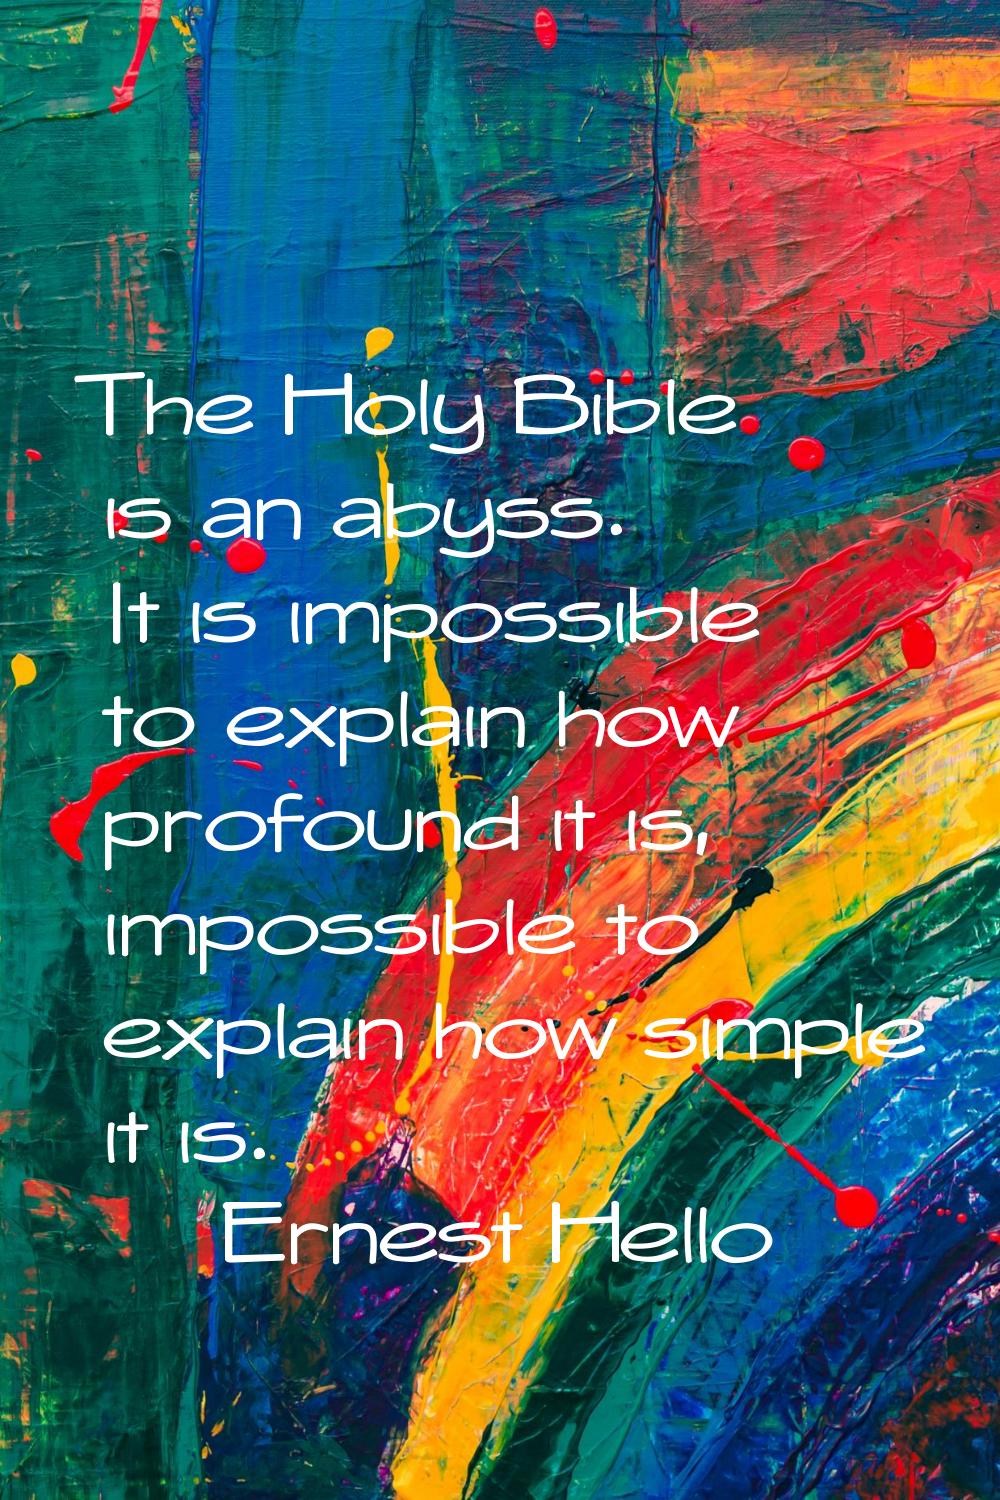 The Holy Bible is an abyss. It is impossible to explain how profound it is, impossible to explain h